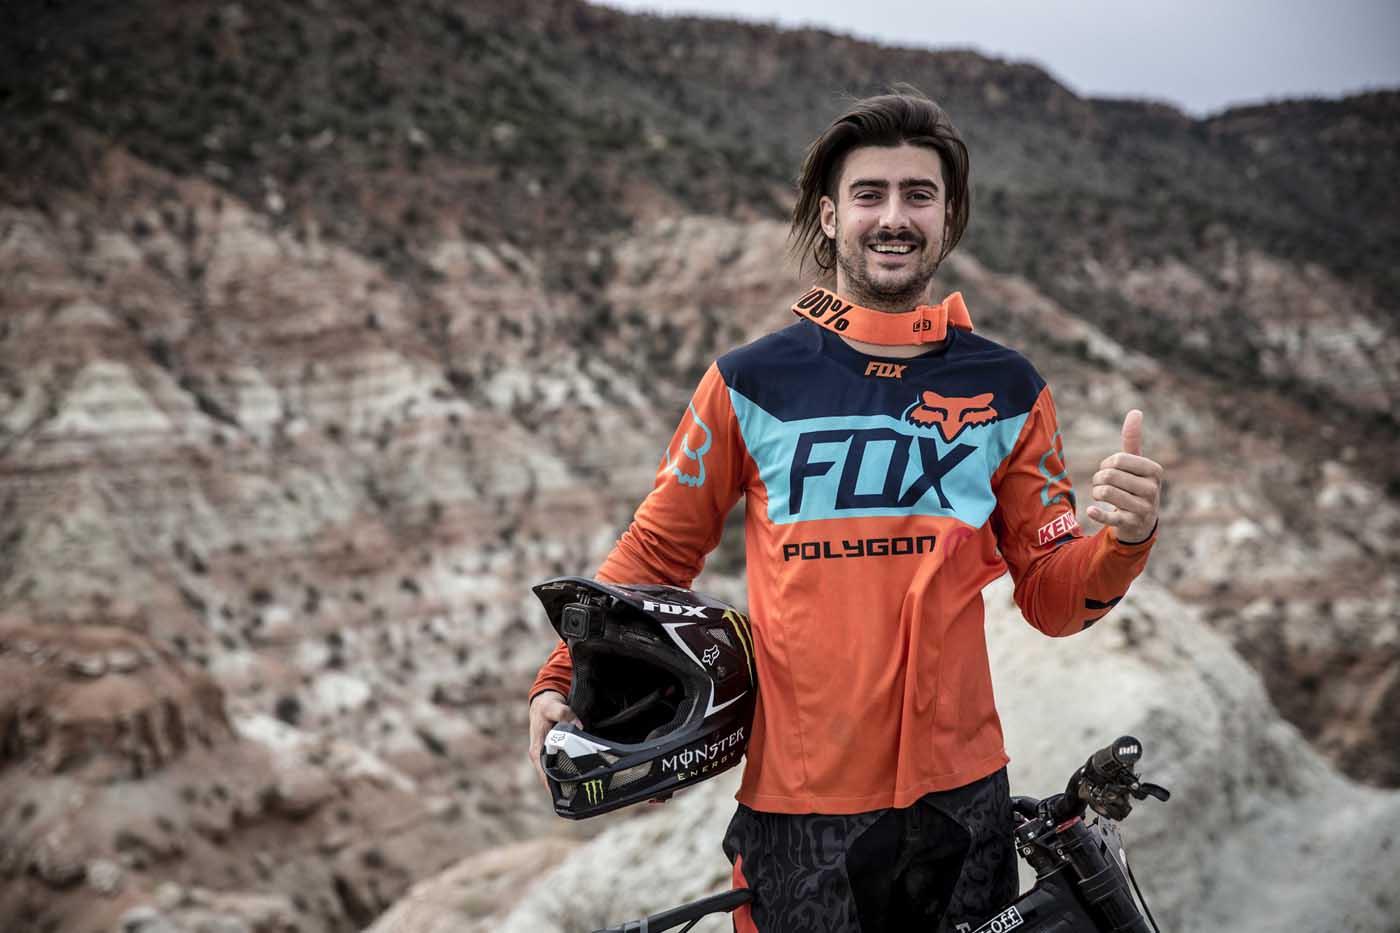 Sam Reynolds poses for a portrait during the Red Bull Rampage in Virgin, UT, USA on 16 October, 2015. // Christian Pondella/Red Bull Content Pool // P-20151017-00208 // Usage for editorial use only // Please go to www.redbullcontentpool.com for further information. //